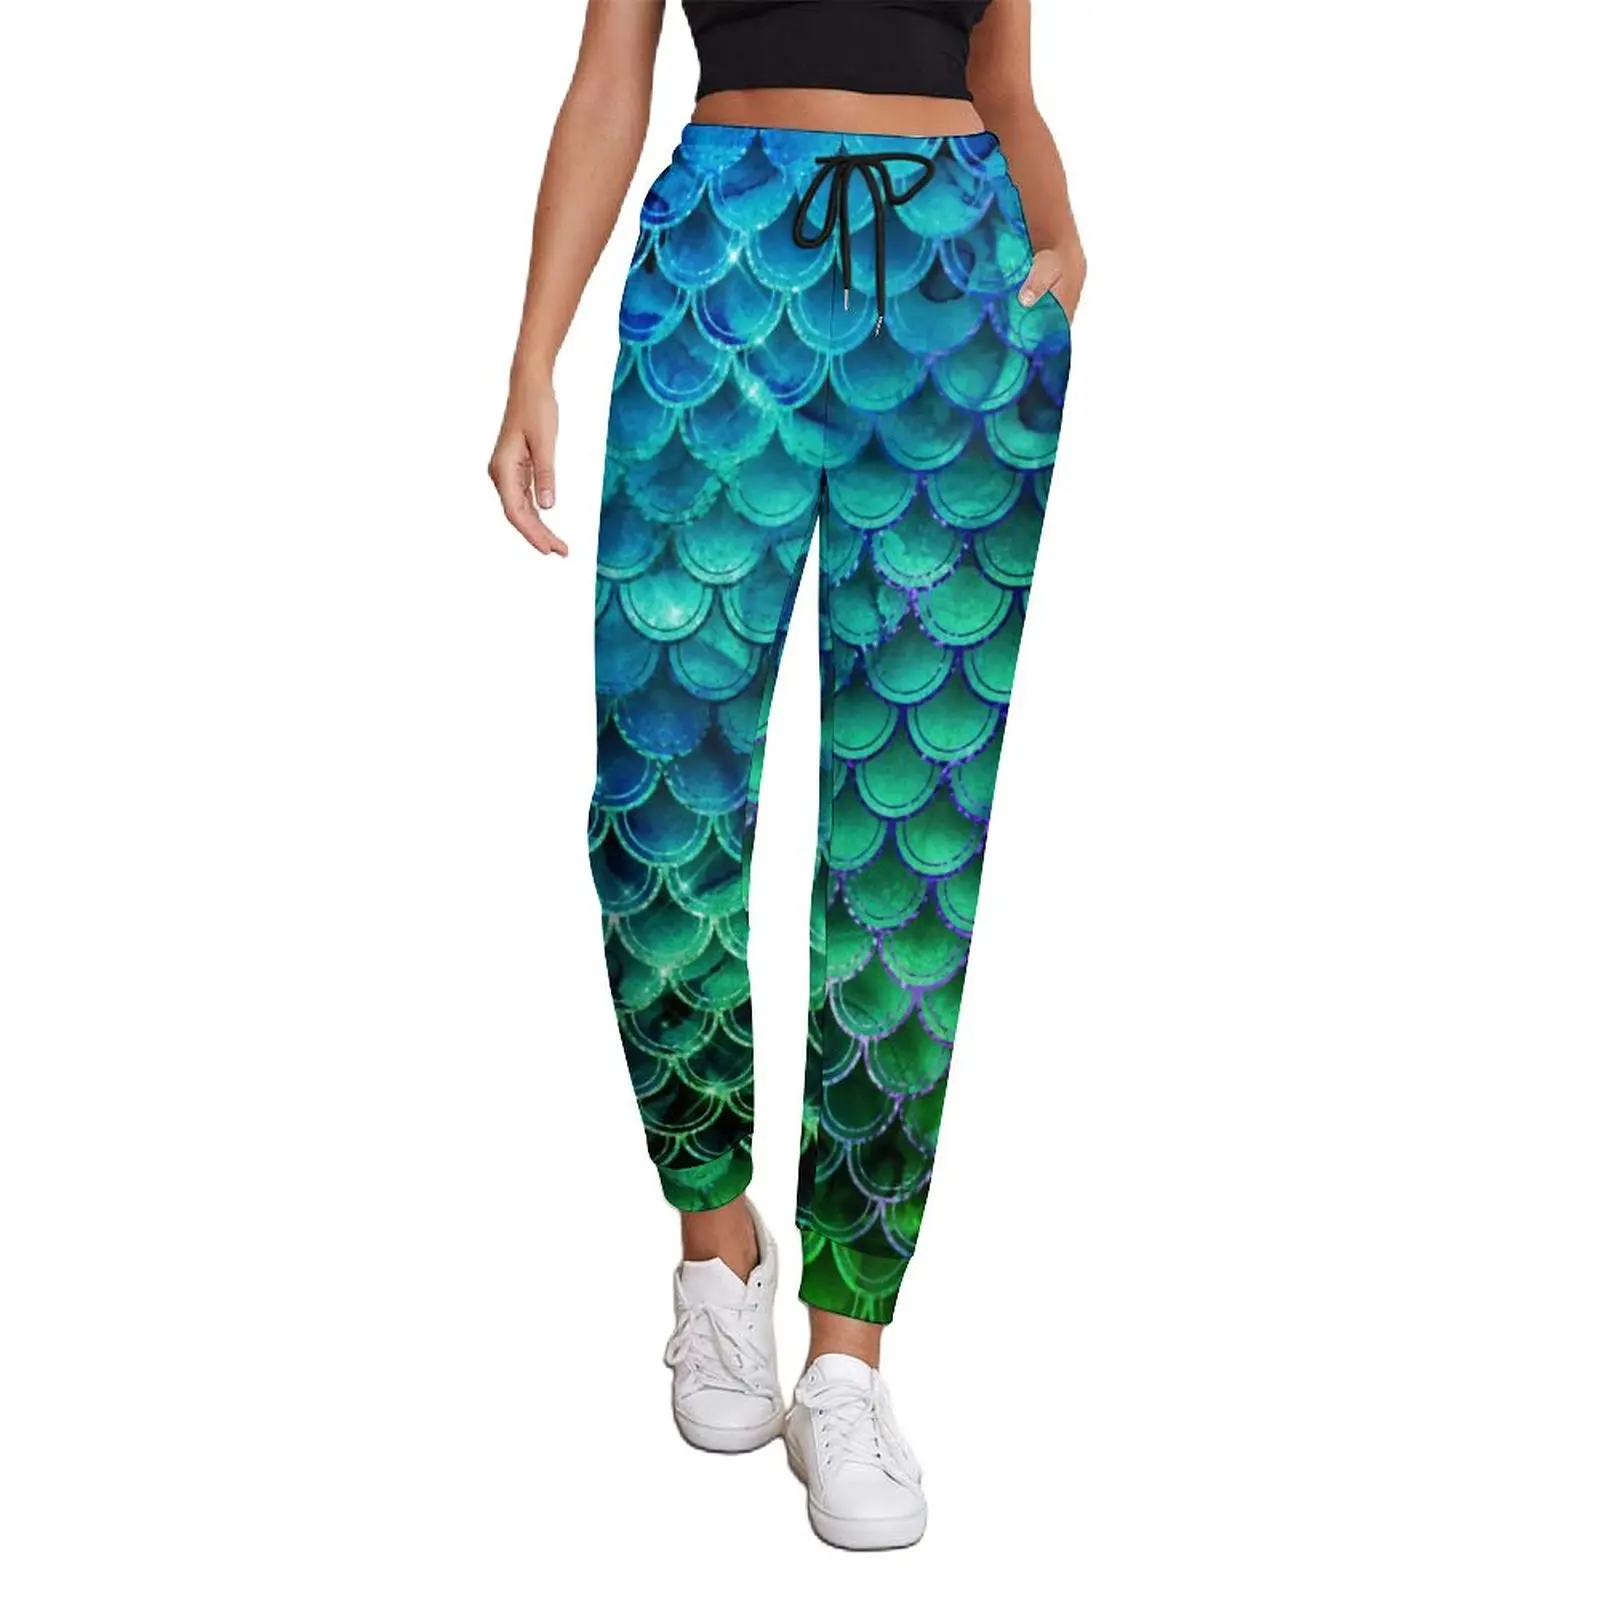 

Fish Mermaid Jogger Pants Women Blue Green Ombre Classic Sweatpants Spring Design Street Wear Big Size Trousers Birthday Gift